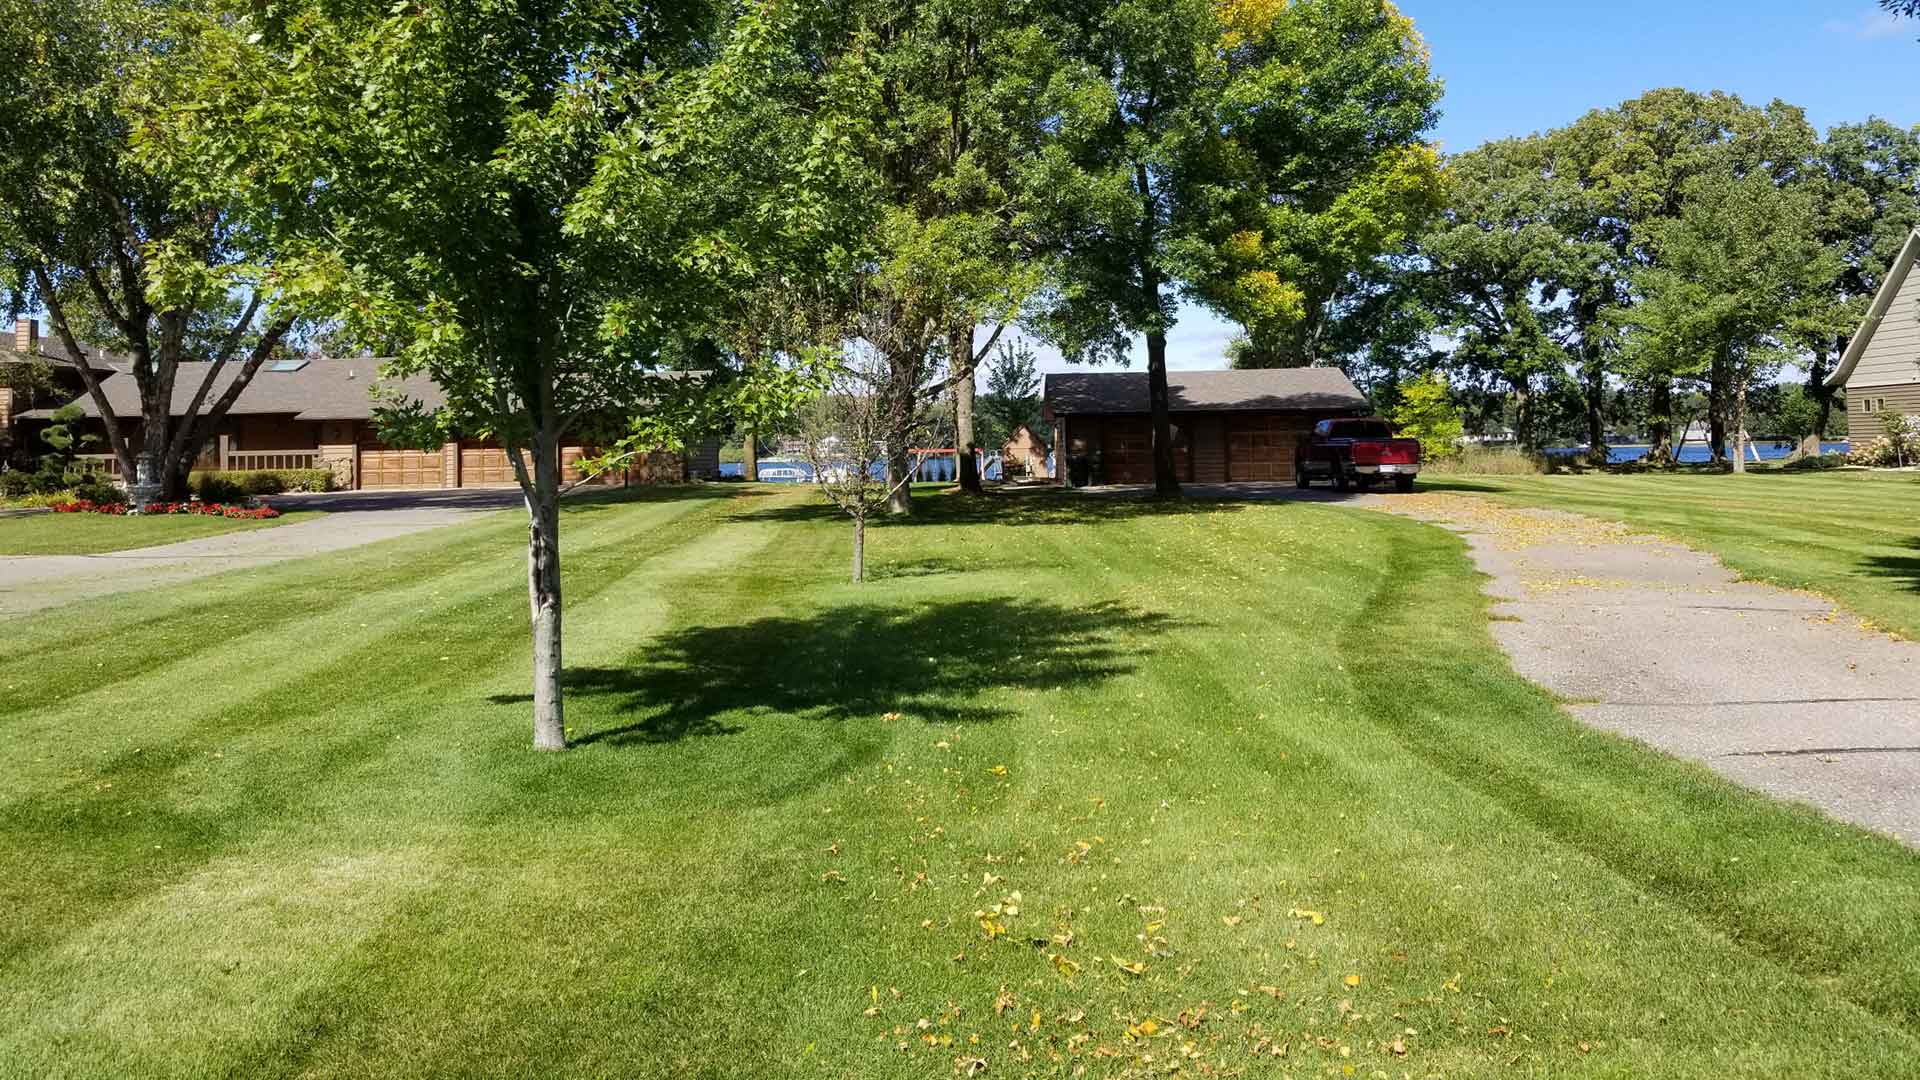 Lawn that was mowed recently in front of a home in St. Cloud, MN.